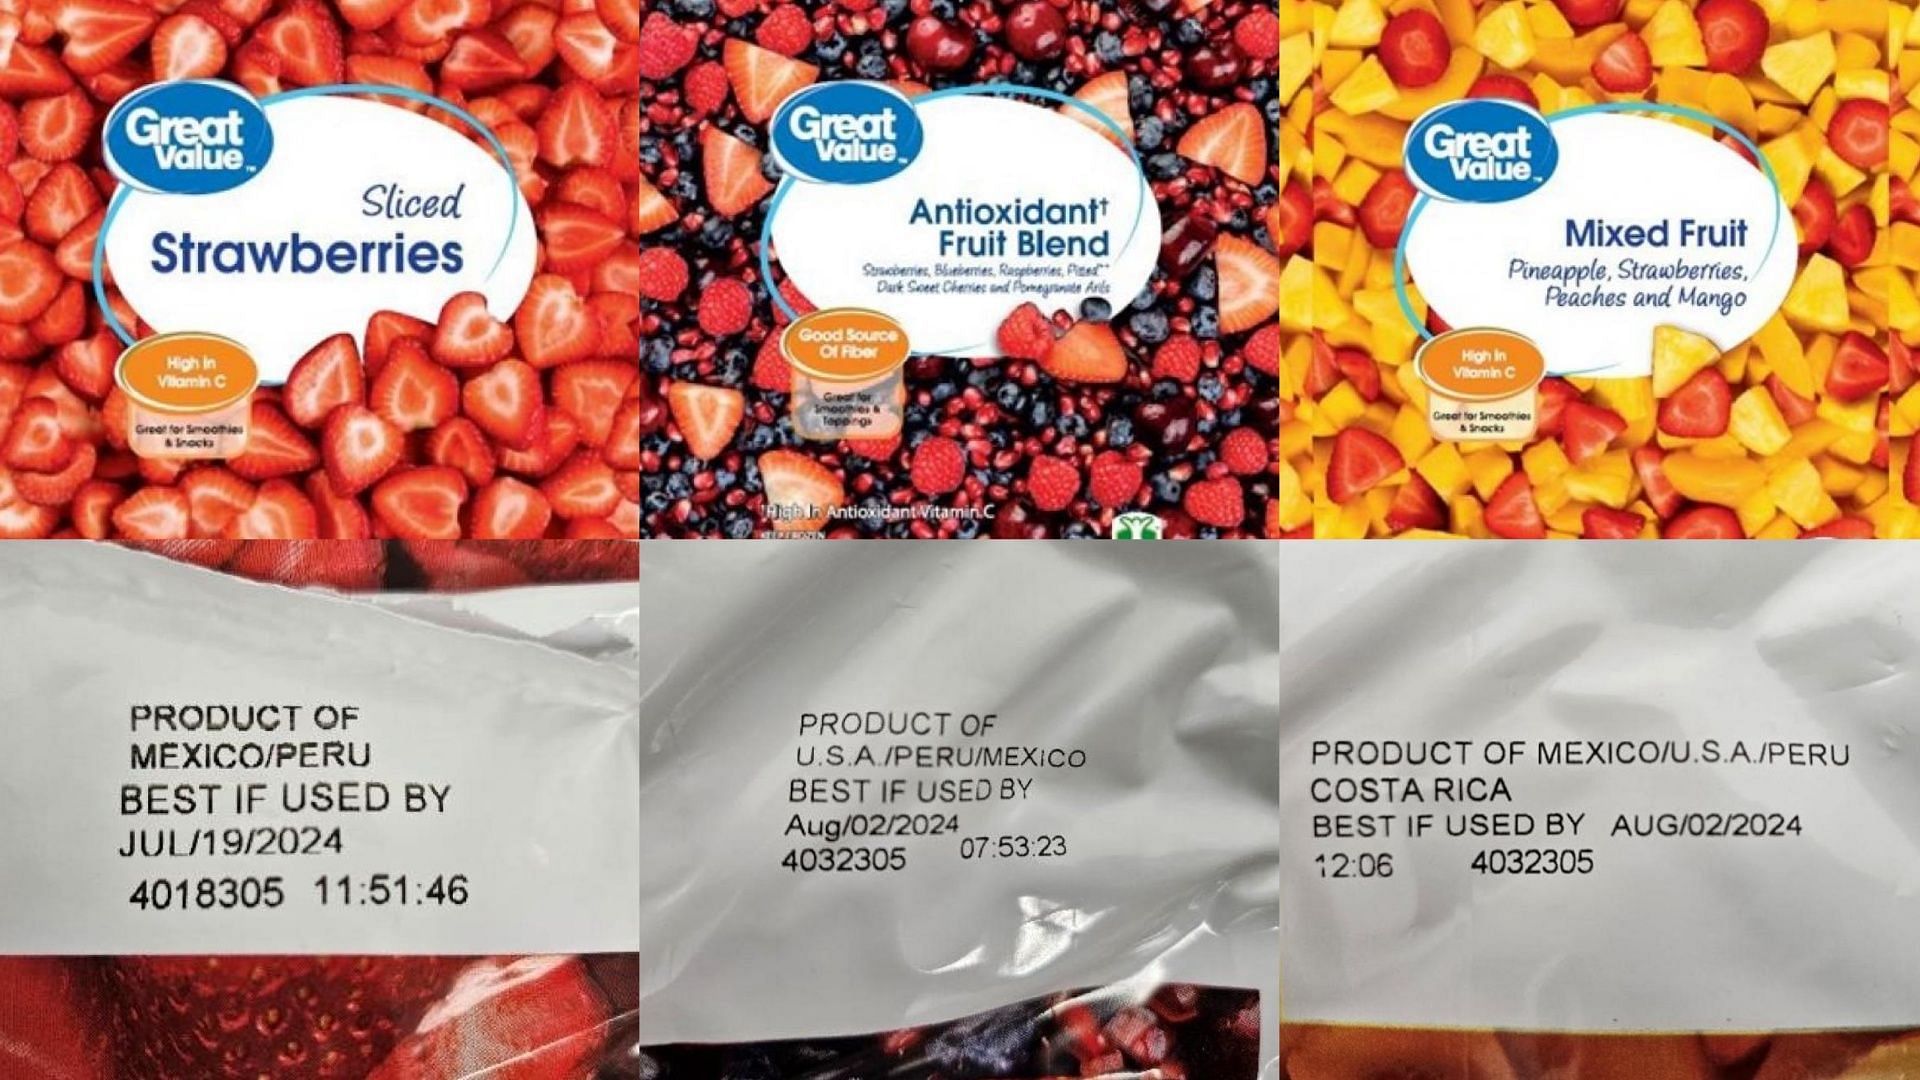 Great Value frozen fruit recall Reason, affected lot, distribution